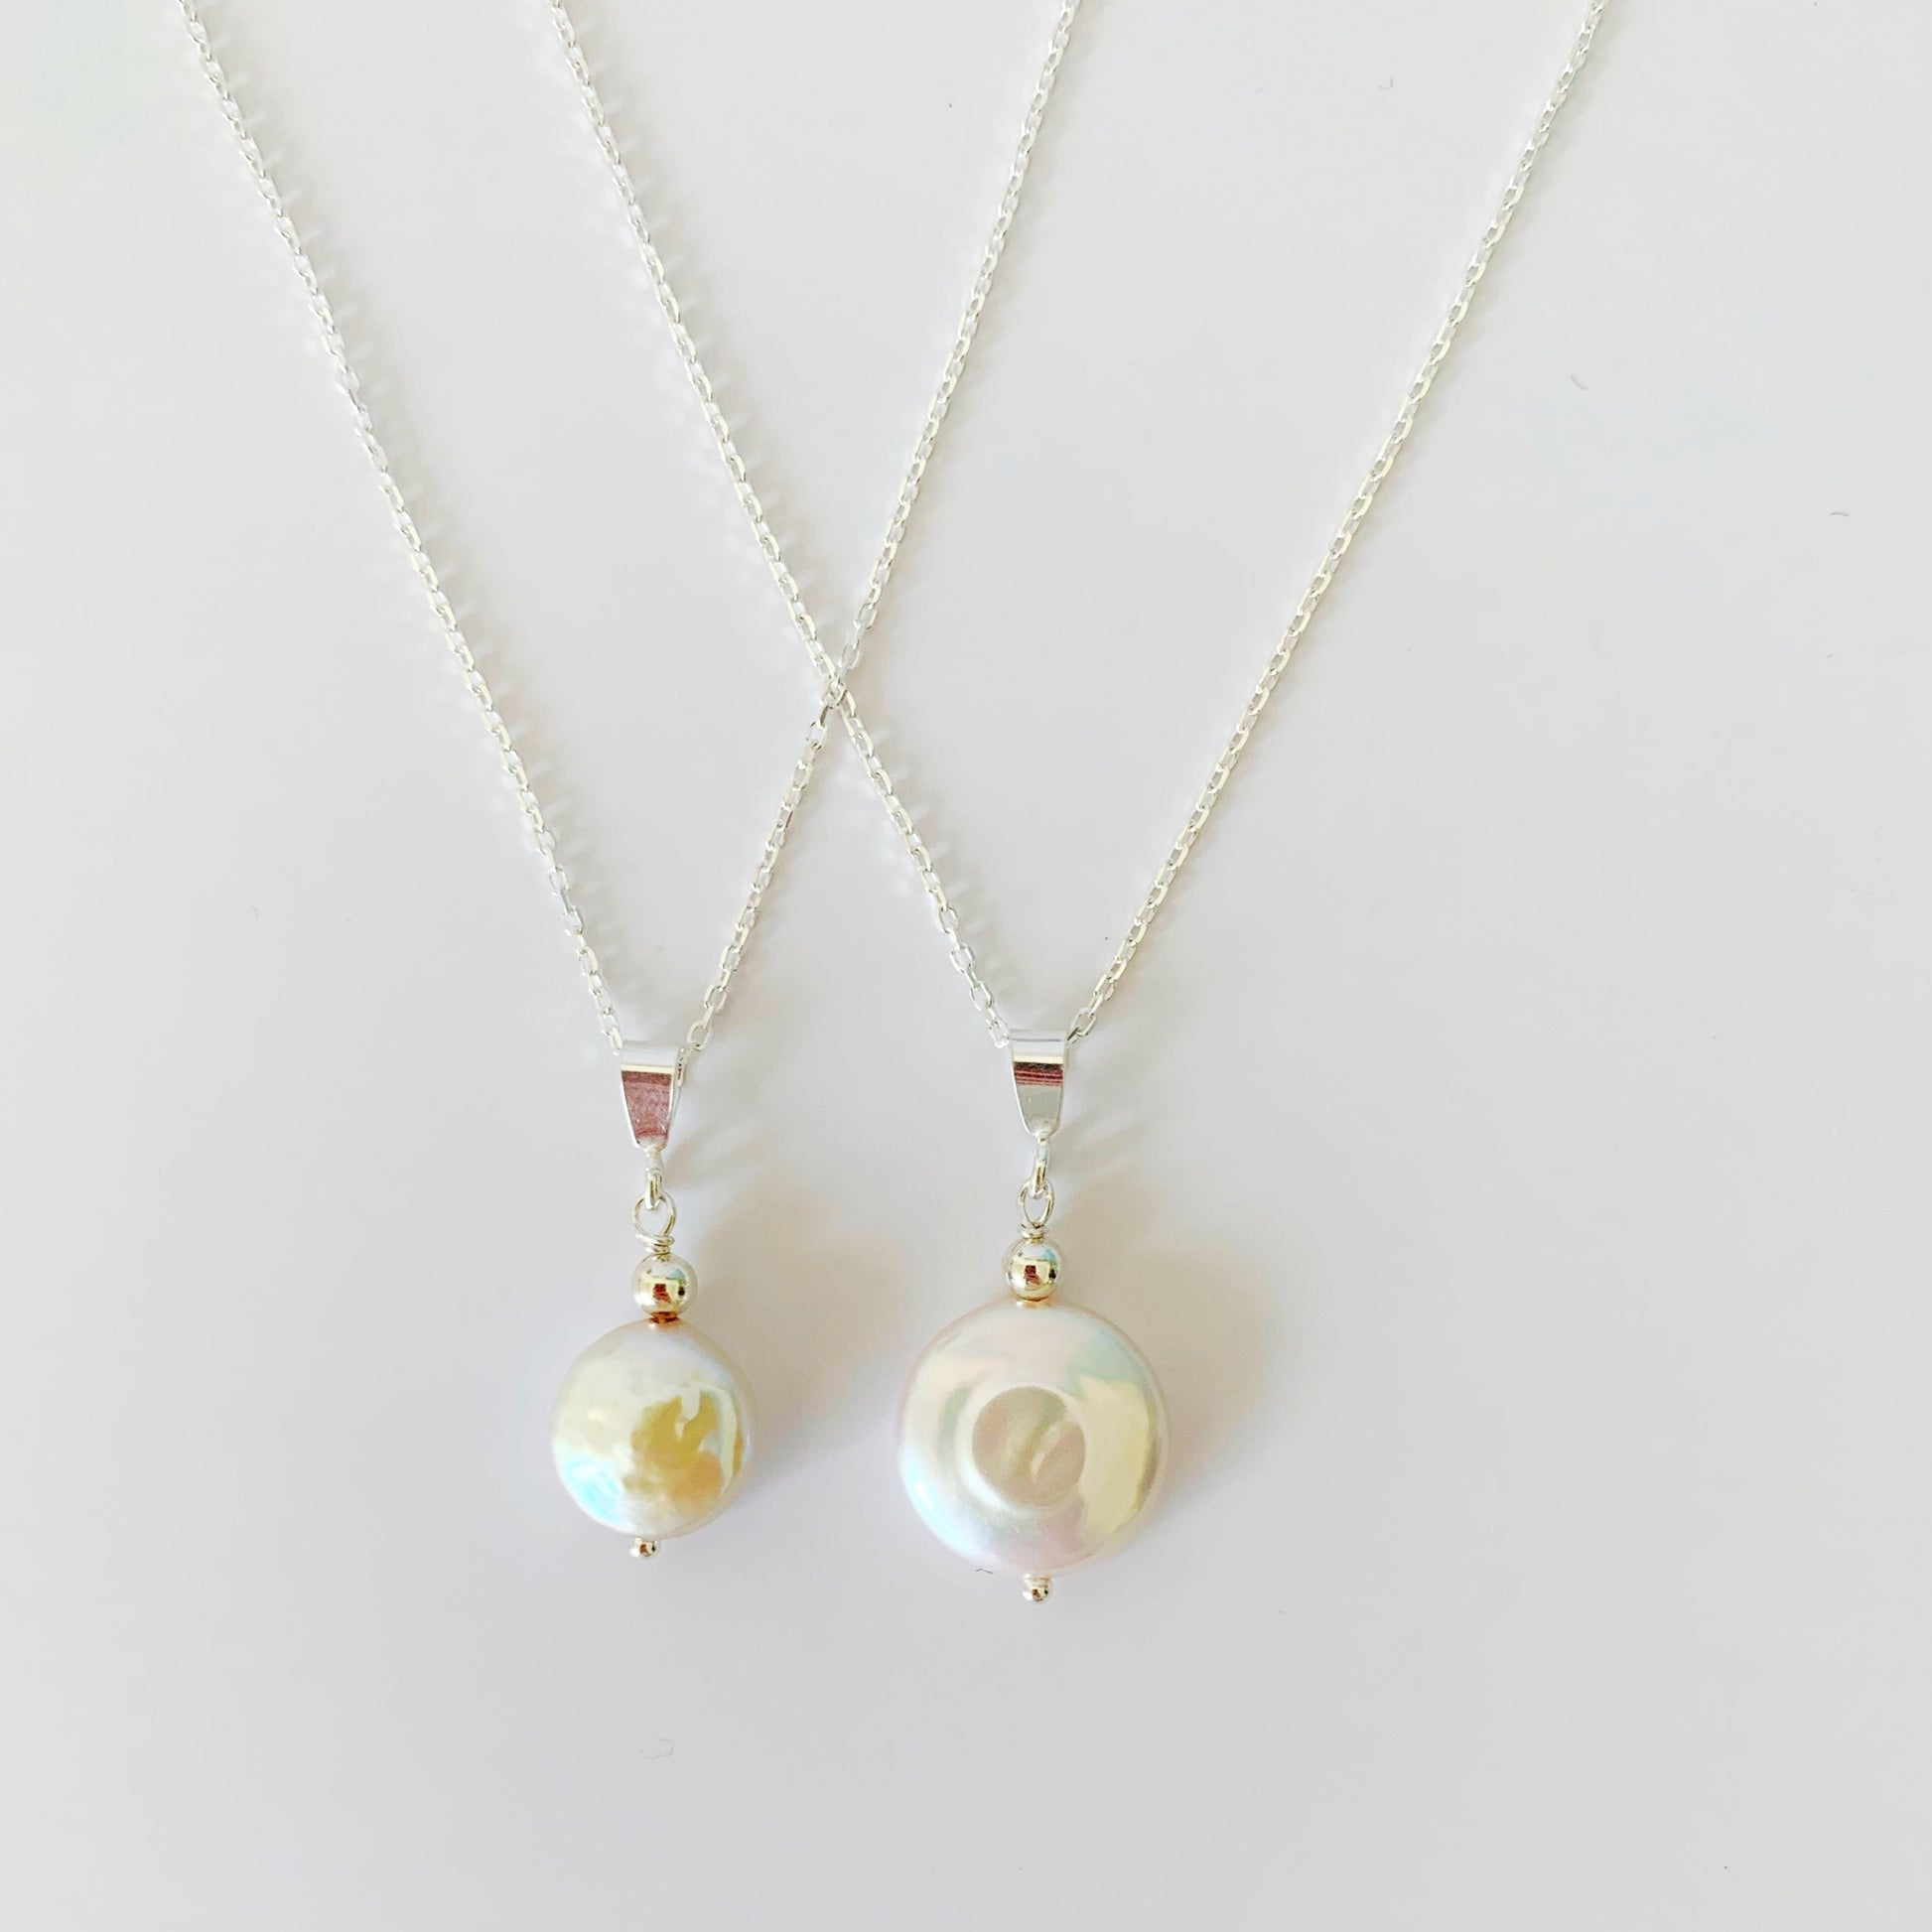 an image of the newport necklace versus the newport gala necklace for size comparison. pictured on a white surface